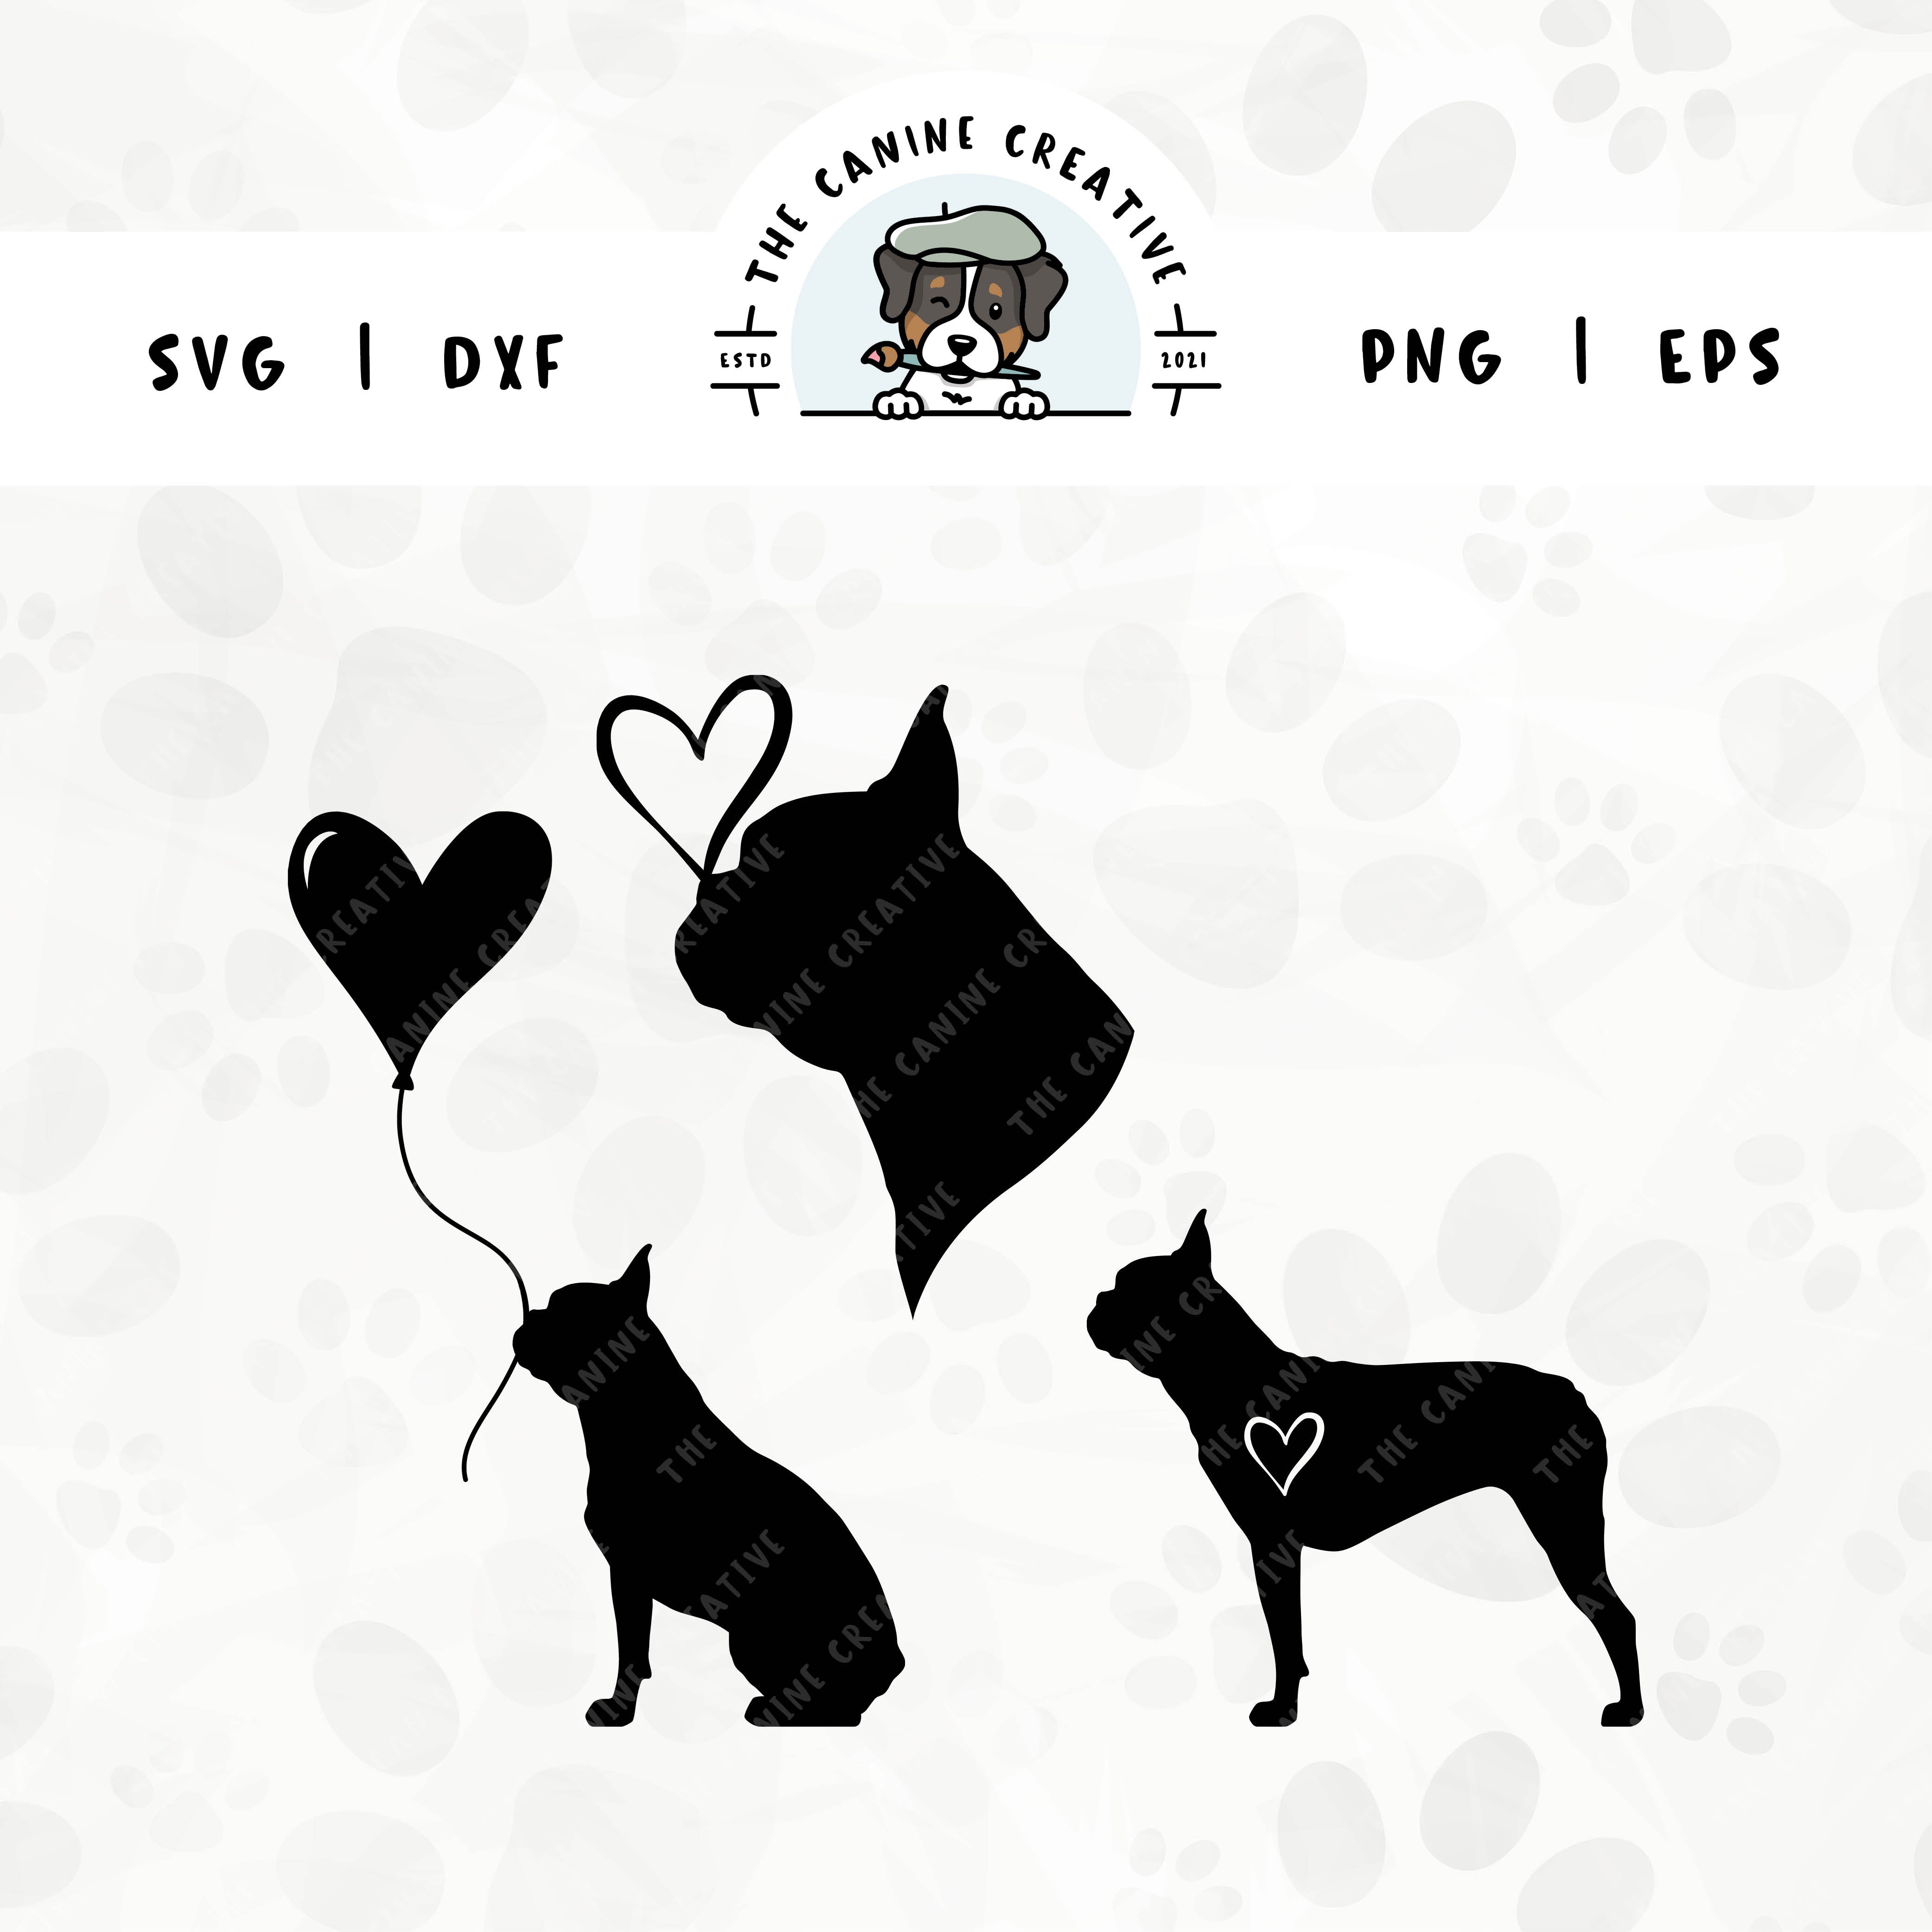 This 3-pack Boston Terrier silhouette bundle features a head portrait of a dog with a heart perched atop it’s nose, a sitting dog holding a heart balloon, and a standing profile of a dog with a heart inset. File formats include: SVG, DXF, PNG, and EPS.